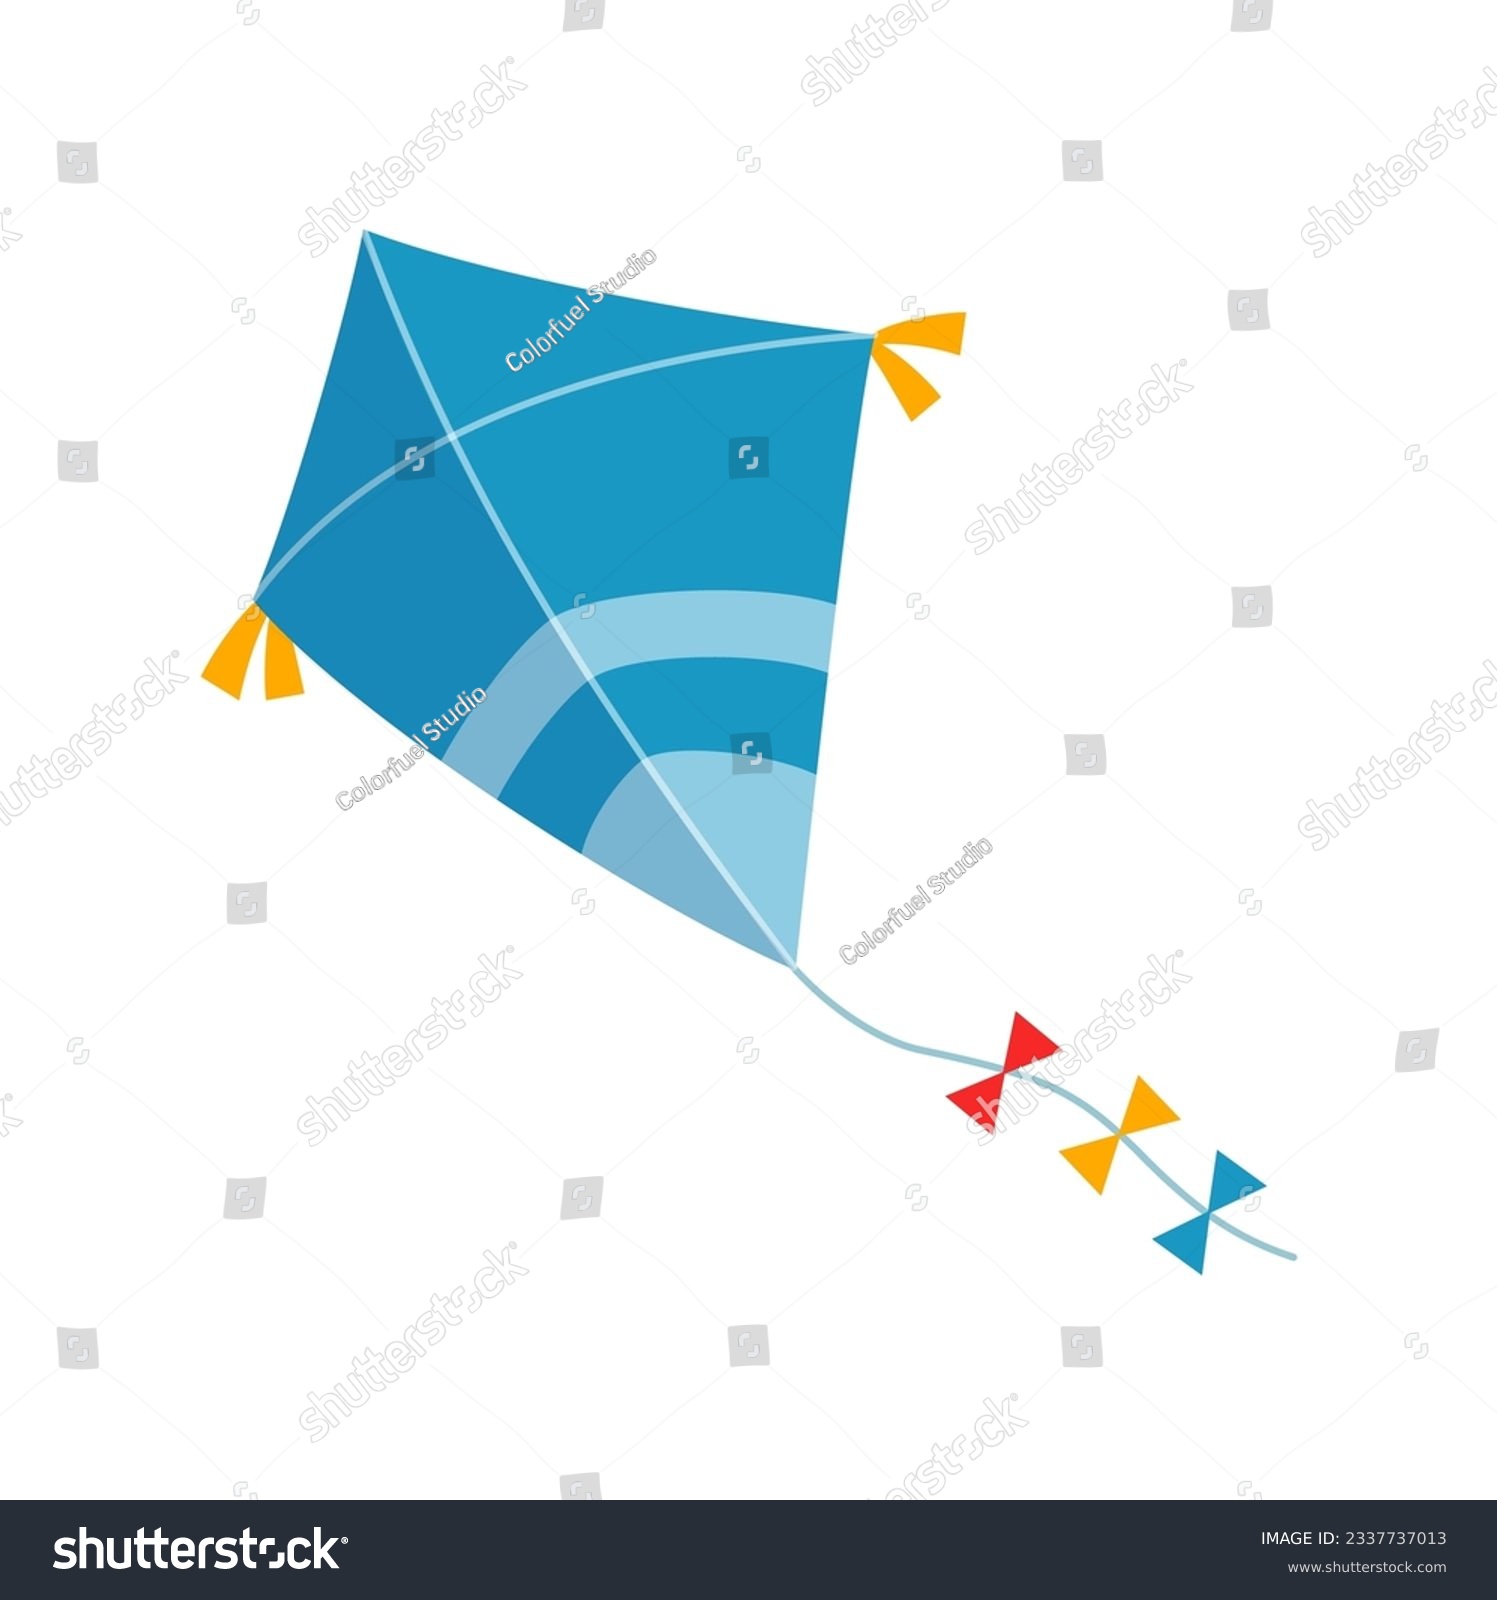 SVG of kite toy fly with good quality and good design svg